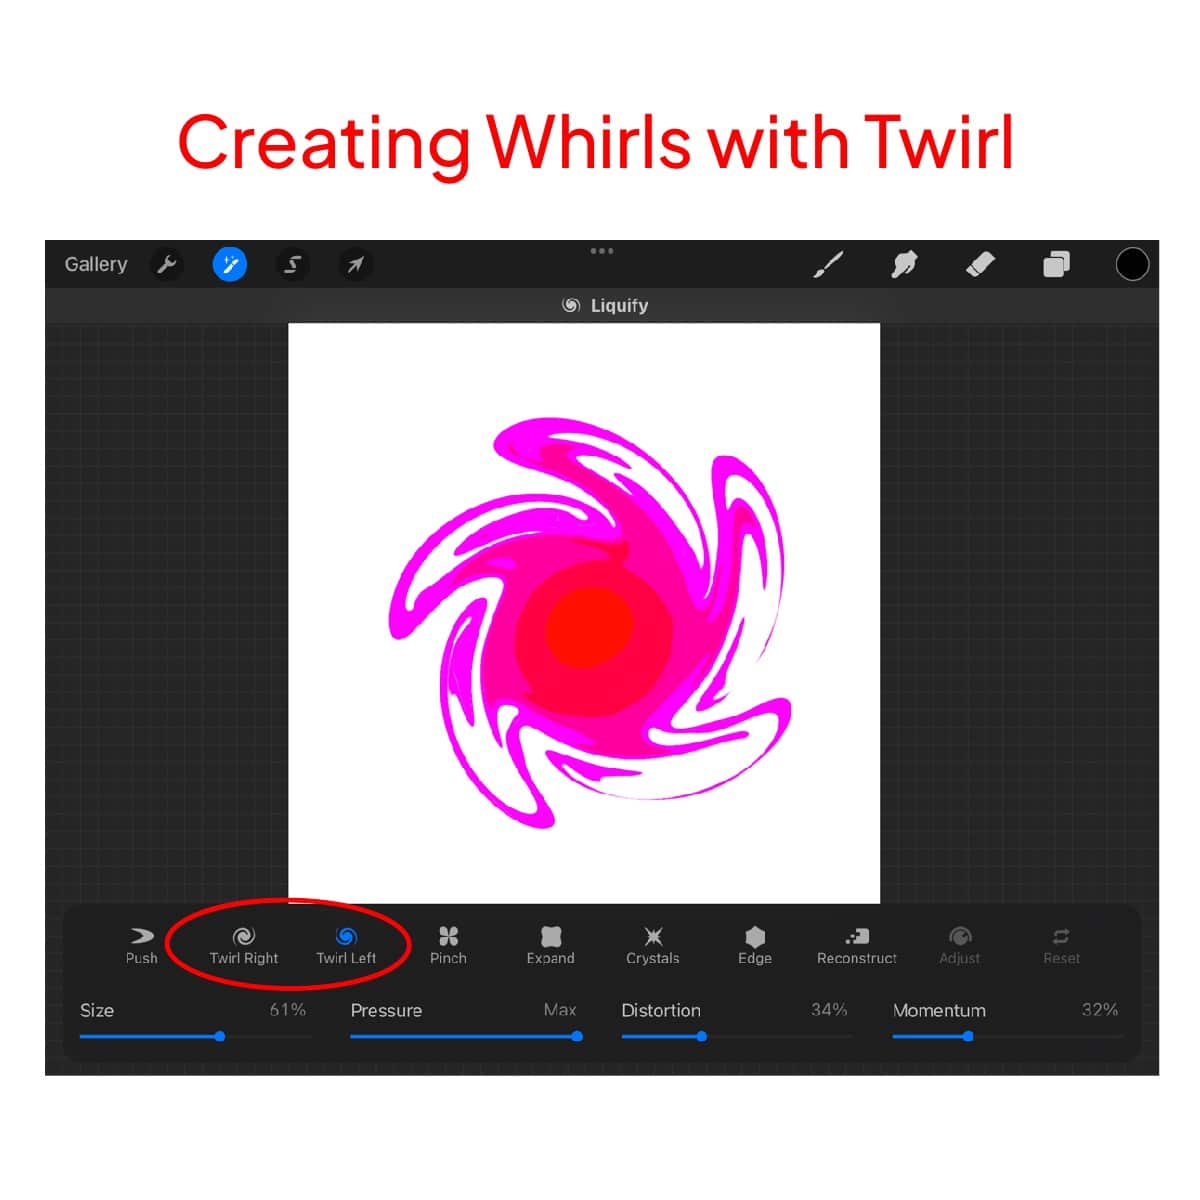 Creating whirls with Twirl